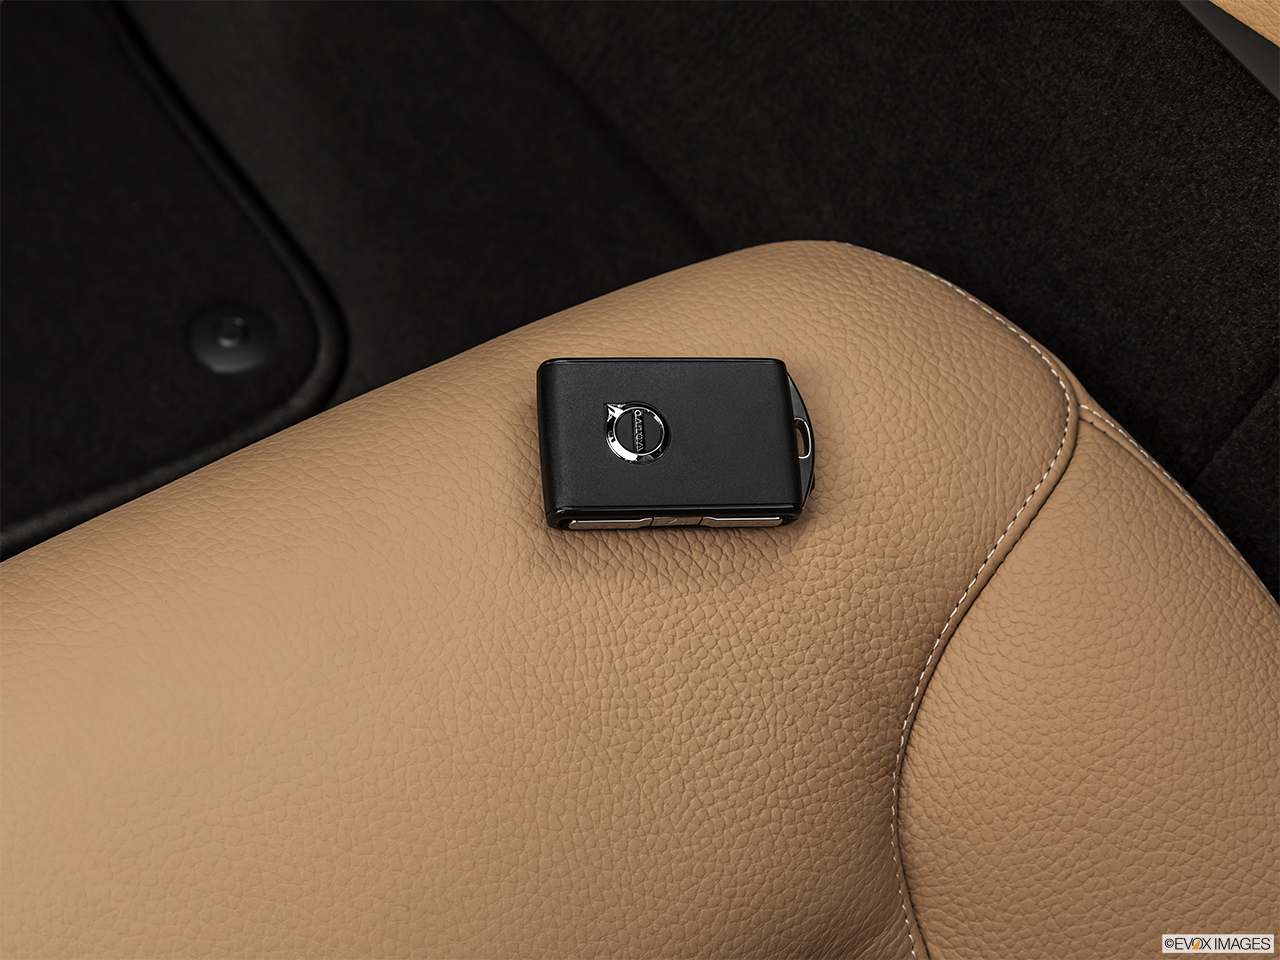 2019 Volvo S90 T5 Momentum Key fob on driver's seat. 